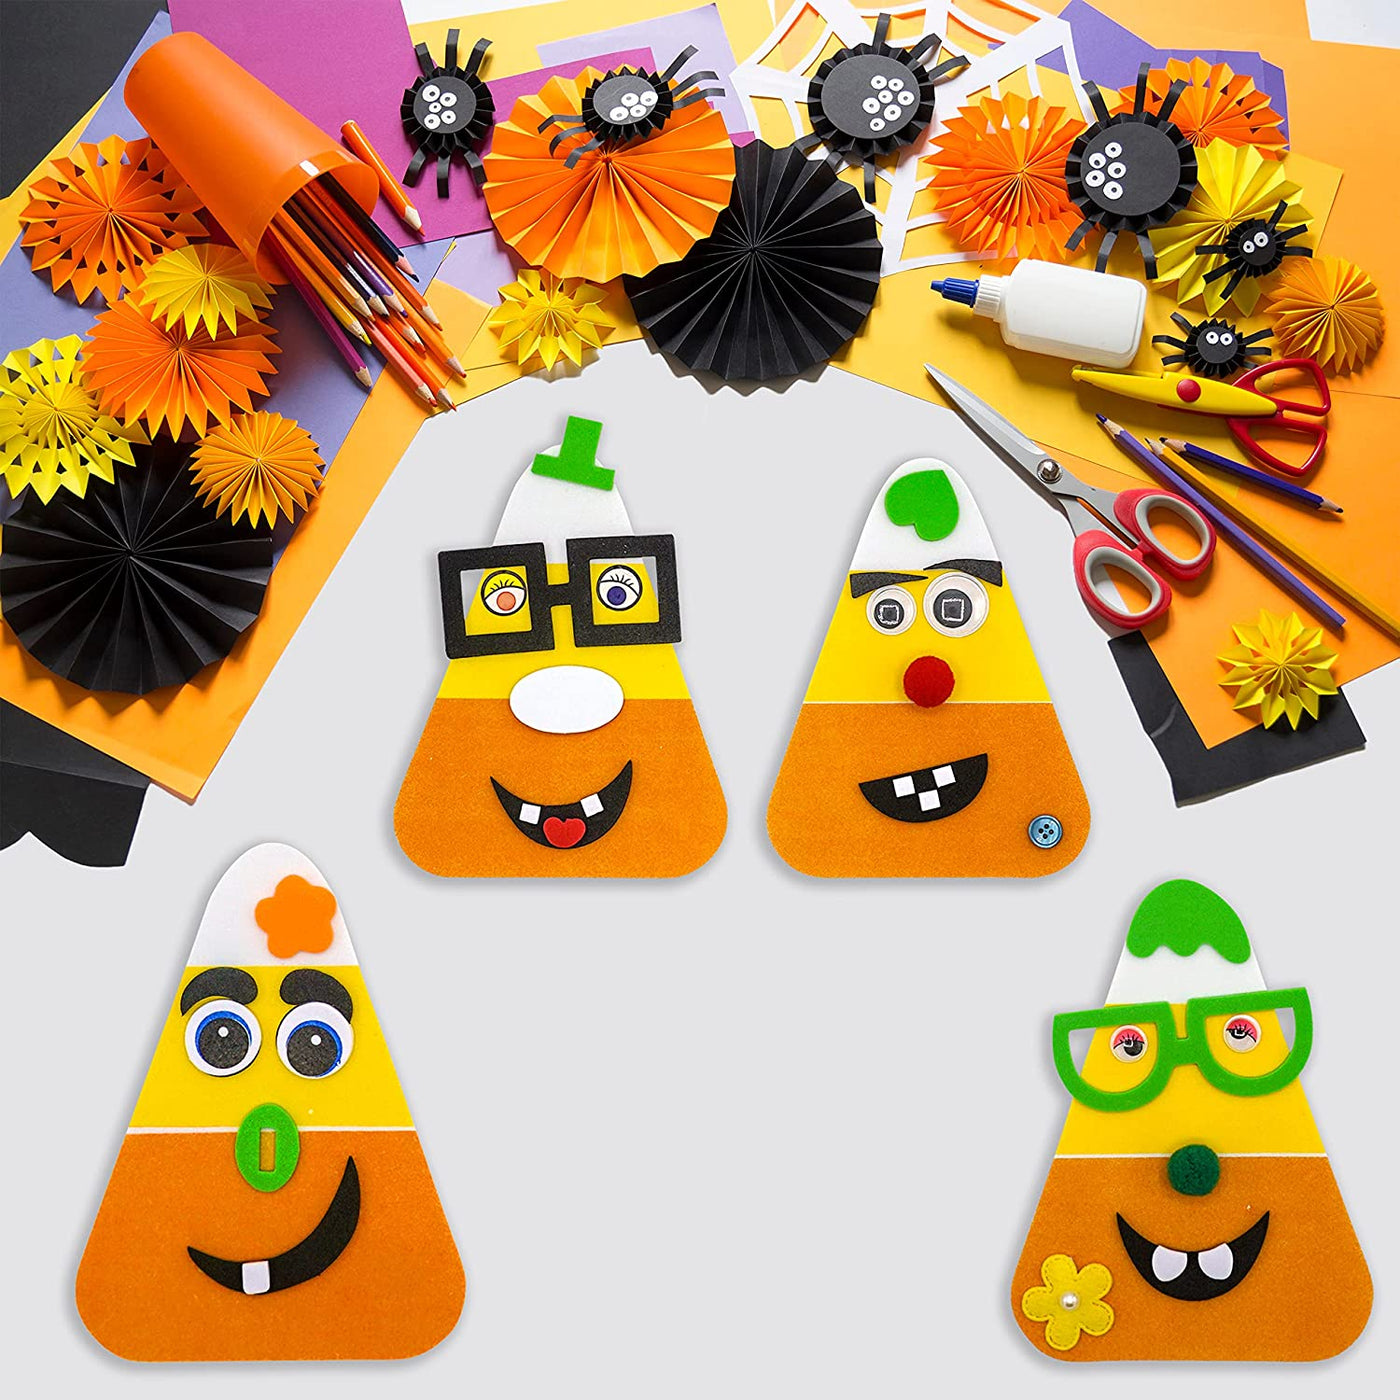 4E's Novelty Halloween Crafts for Kids (12 Pack) Goofy Candy Corn Magnet Foam Craft Kit - Bulk Fall Arts and Crafts for Toddlers & Kids, Halloween Activities for Kids Party